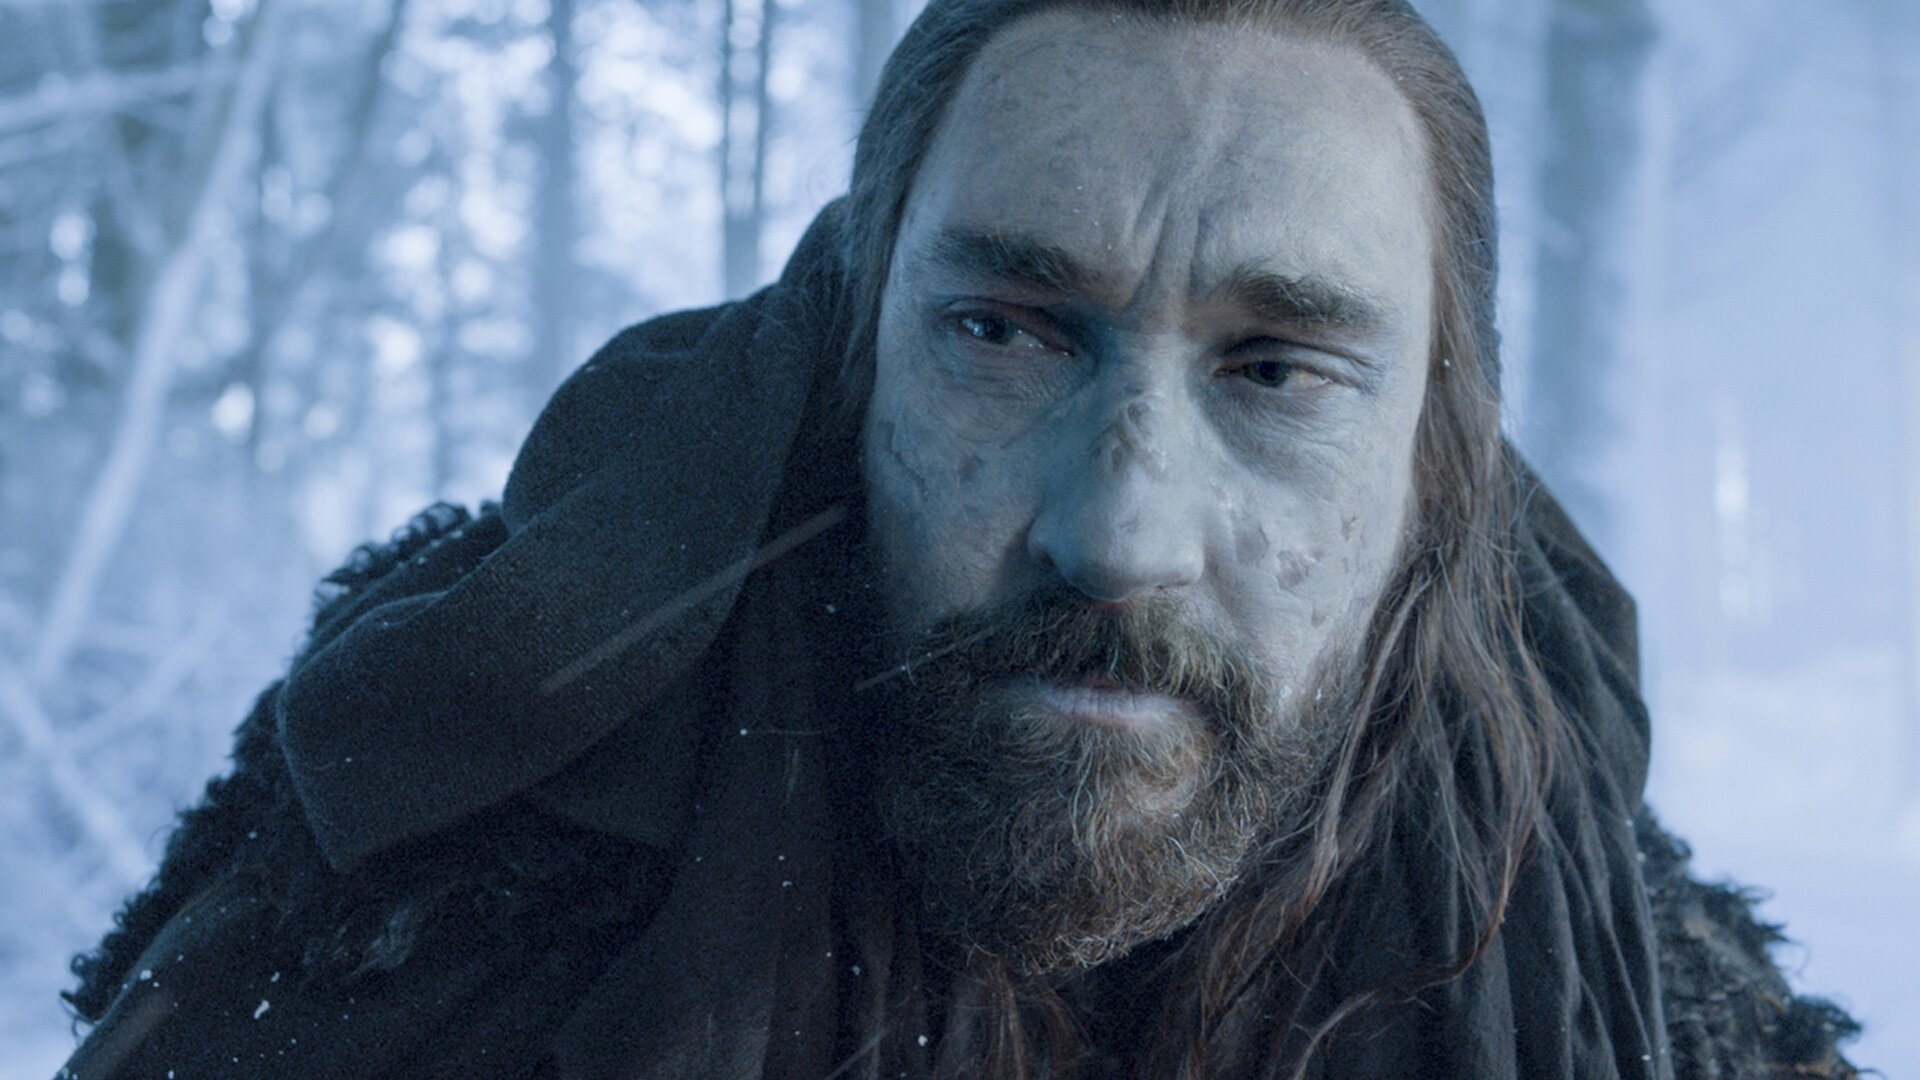 GAME OF THRONES Actor Joseph Mawle to Star in Amazon's LORD OF THE